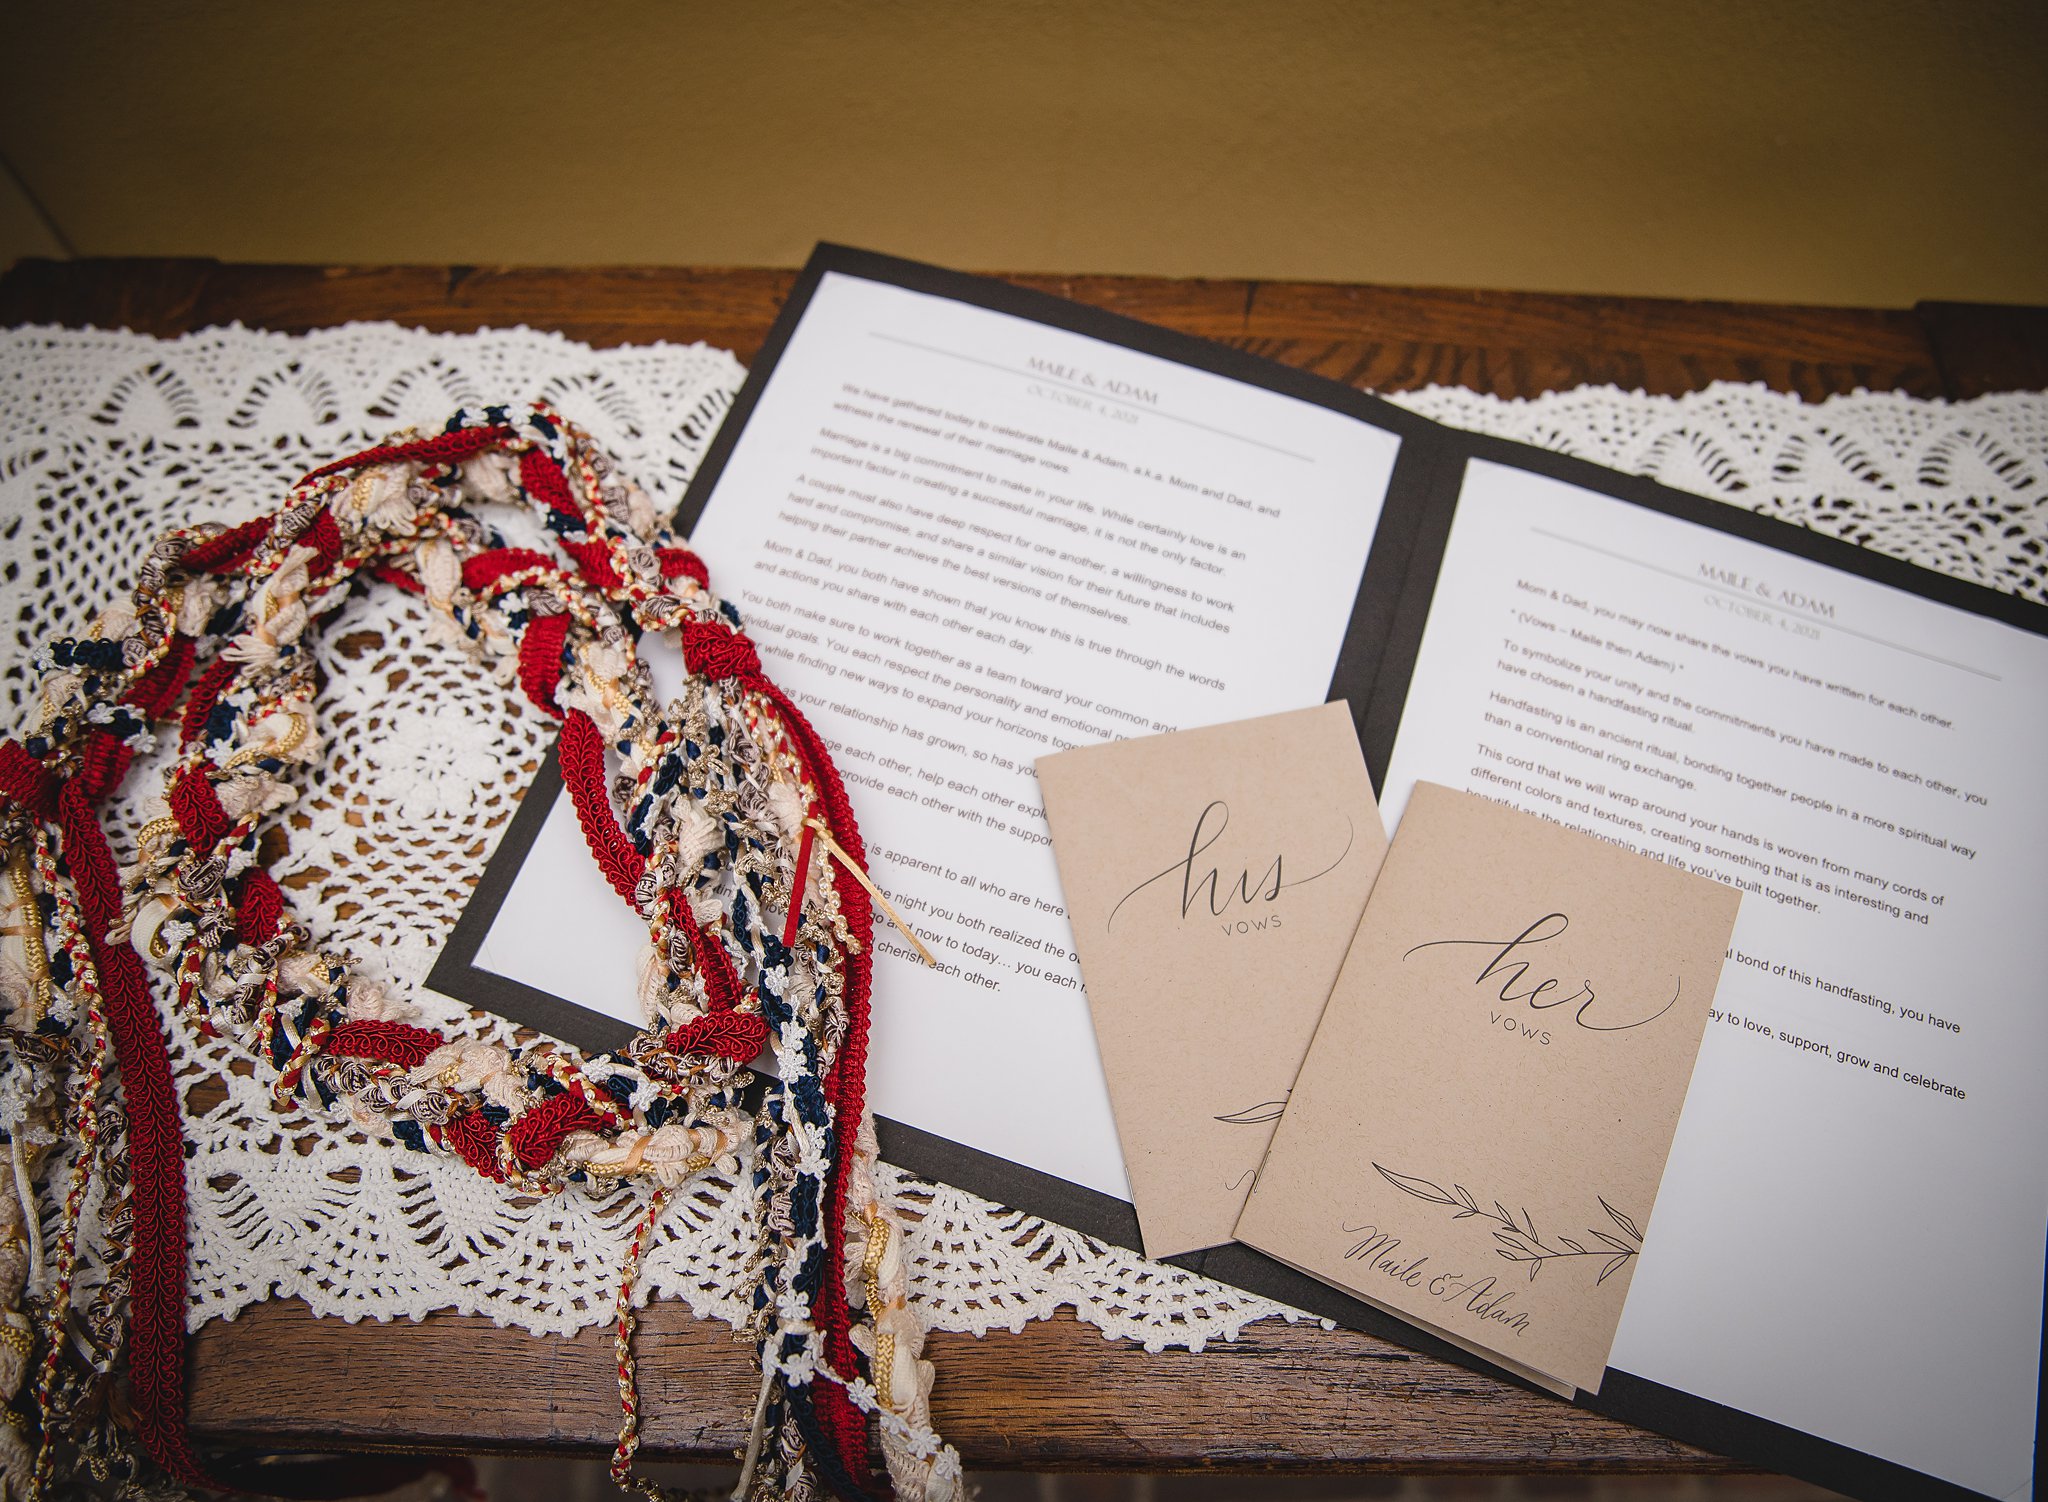 wedding ceremony script, vow books and handfasting cord